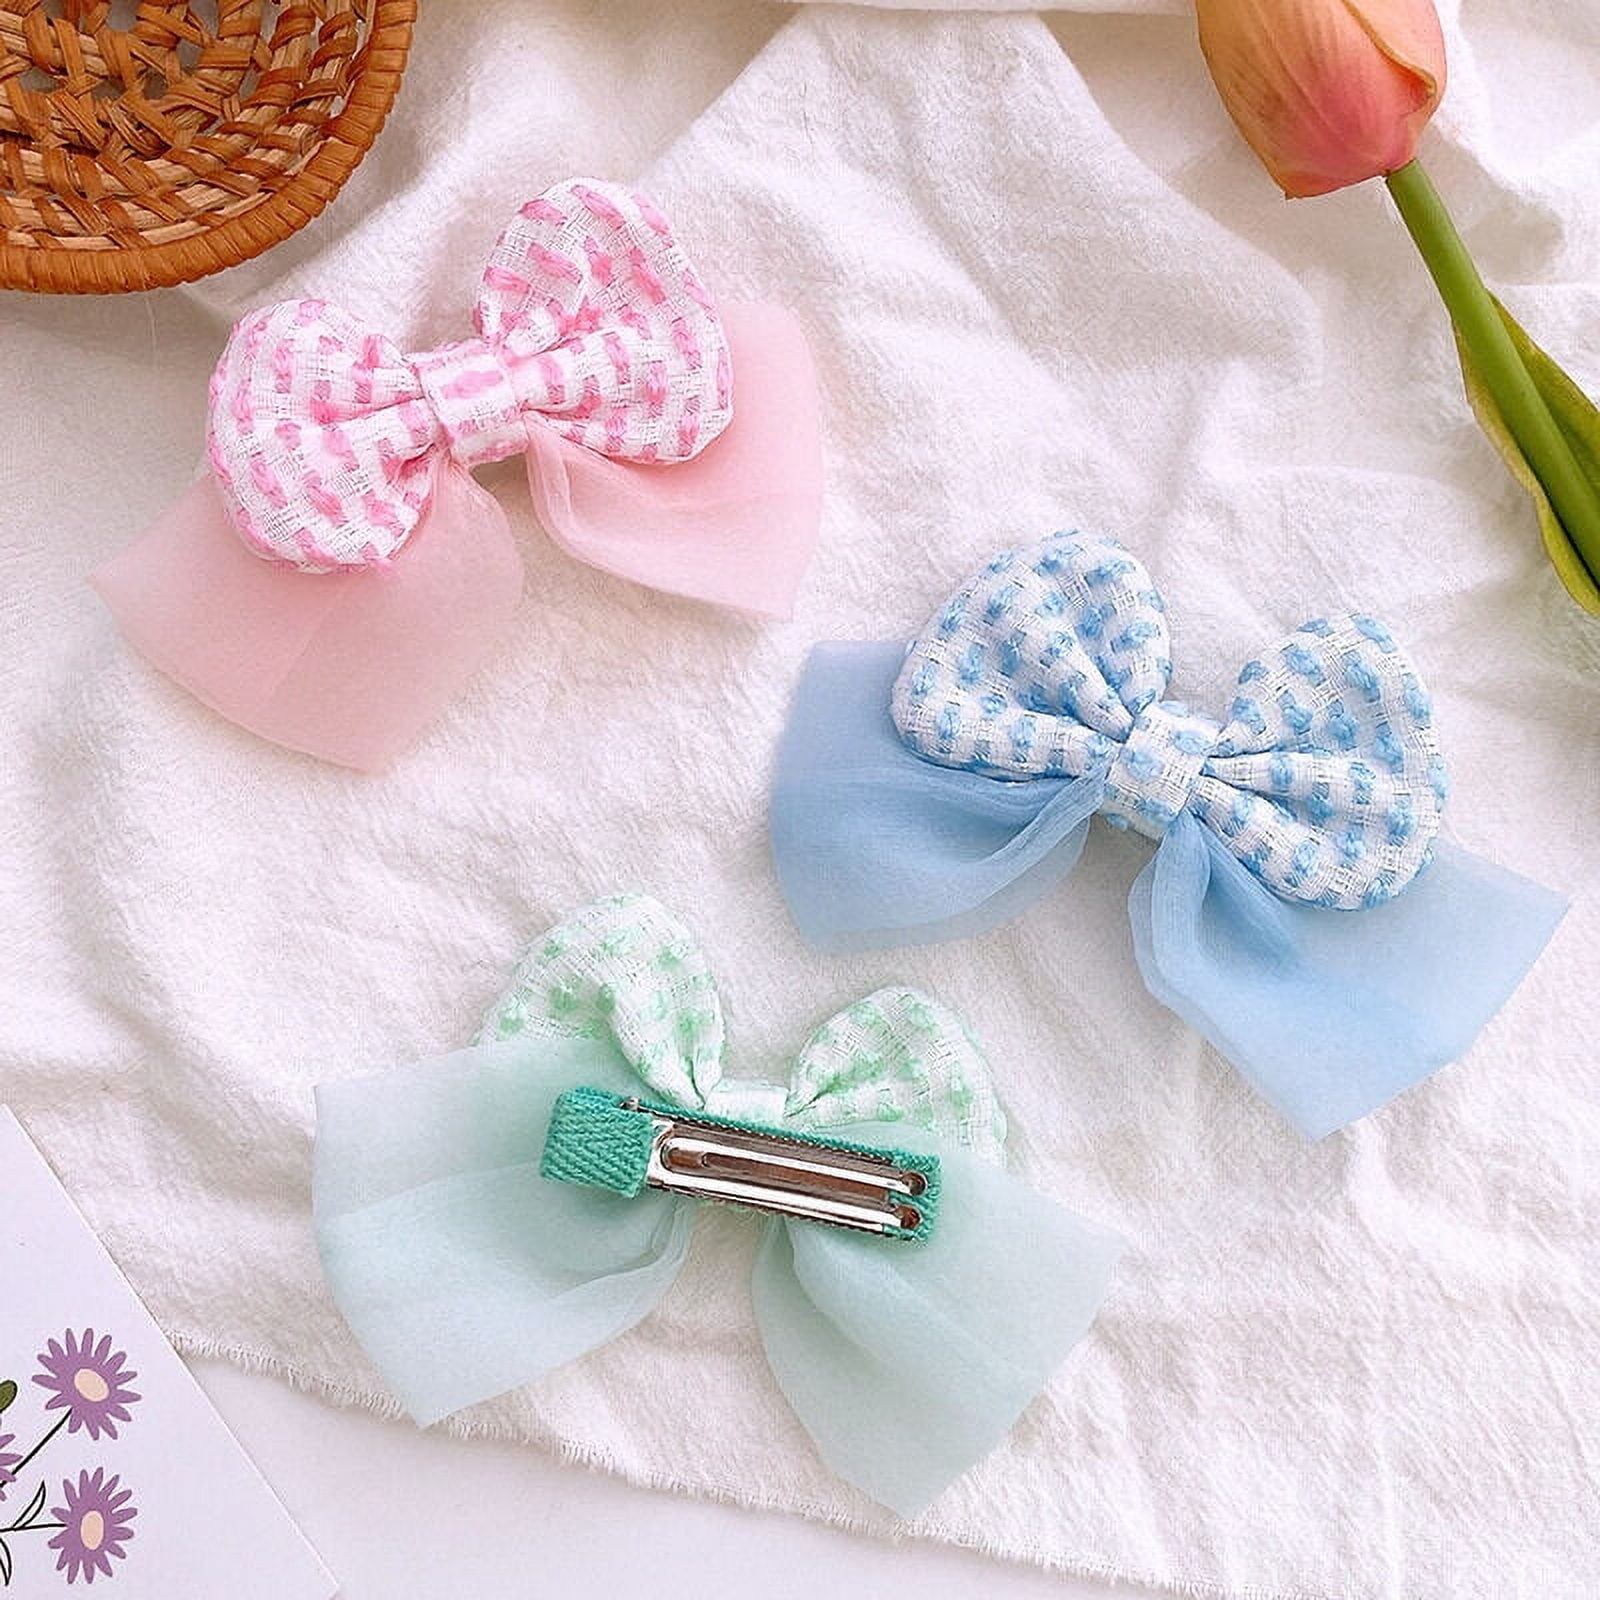  SQUISHMALLOW Cute Hair Headband Jewelry Set for Little Girls -  3pc Toddler Dress Up Kit - 1 Kids Headband With Bow - Necklace - Bracelet